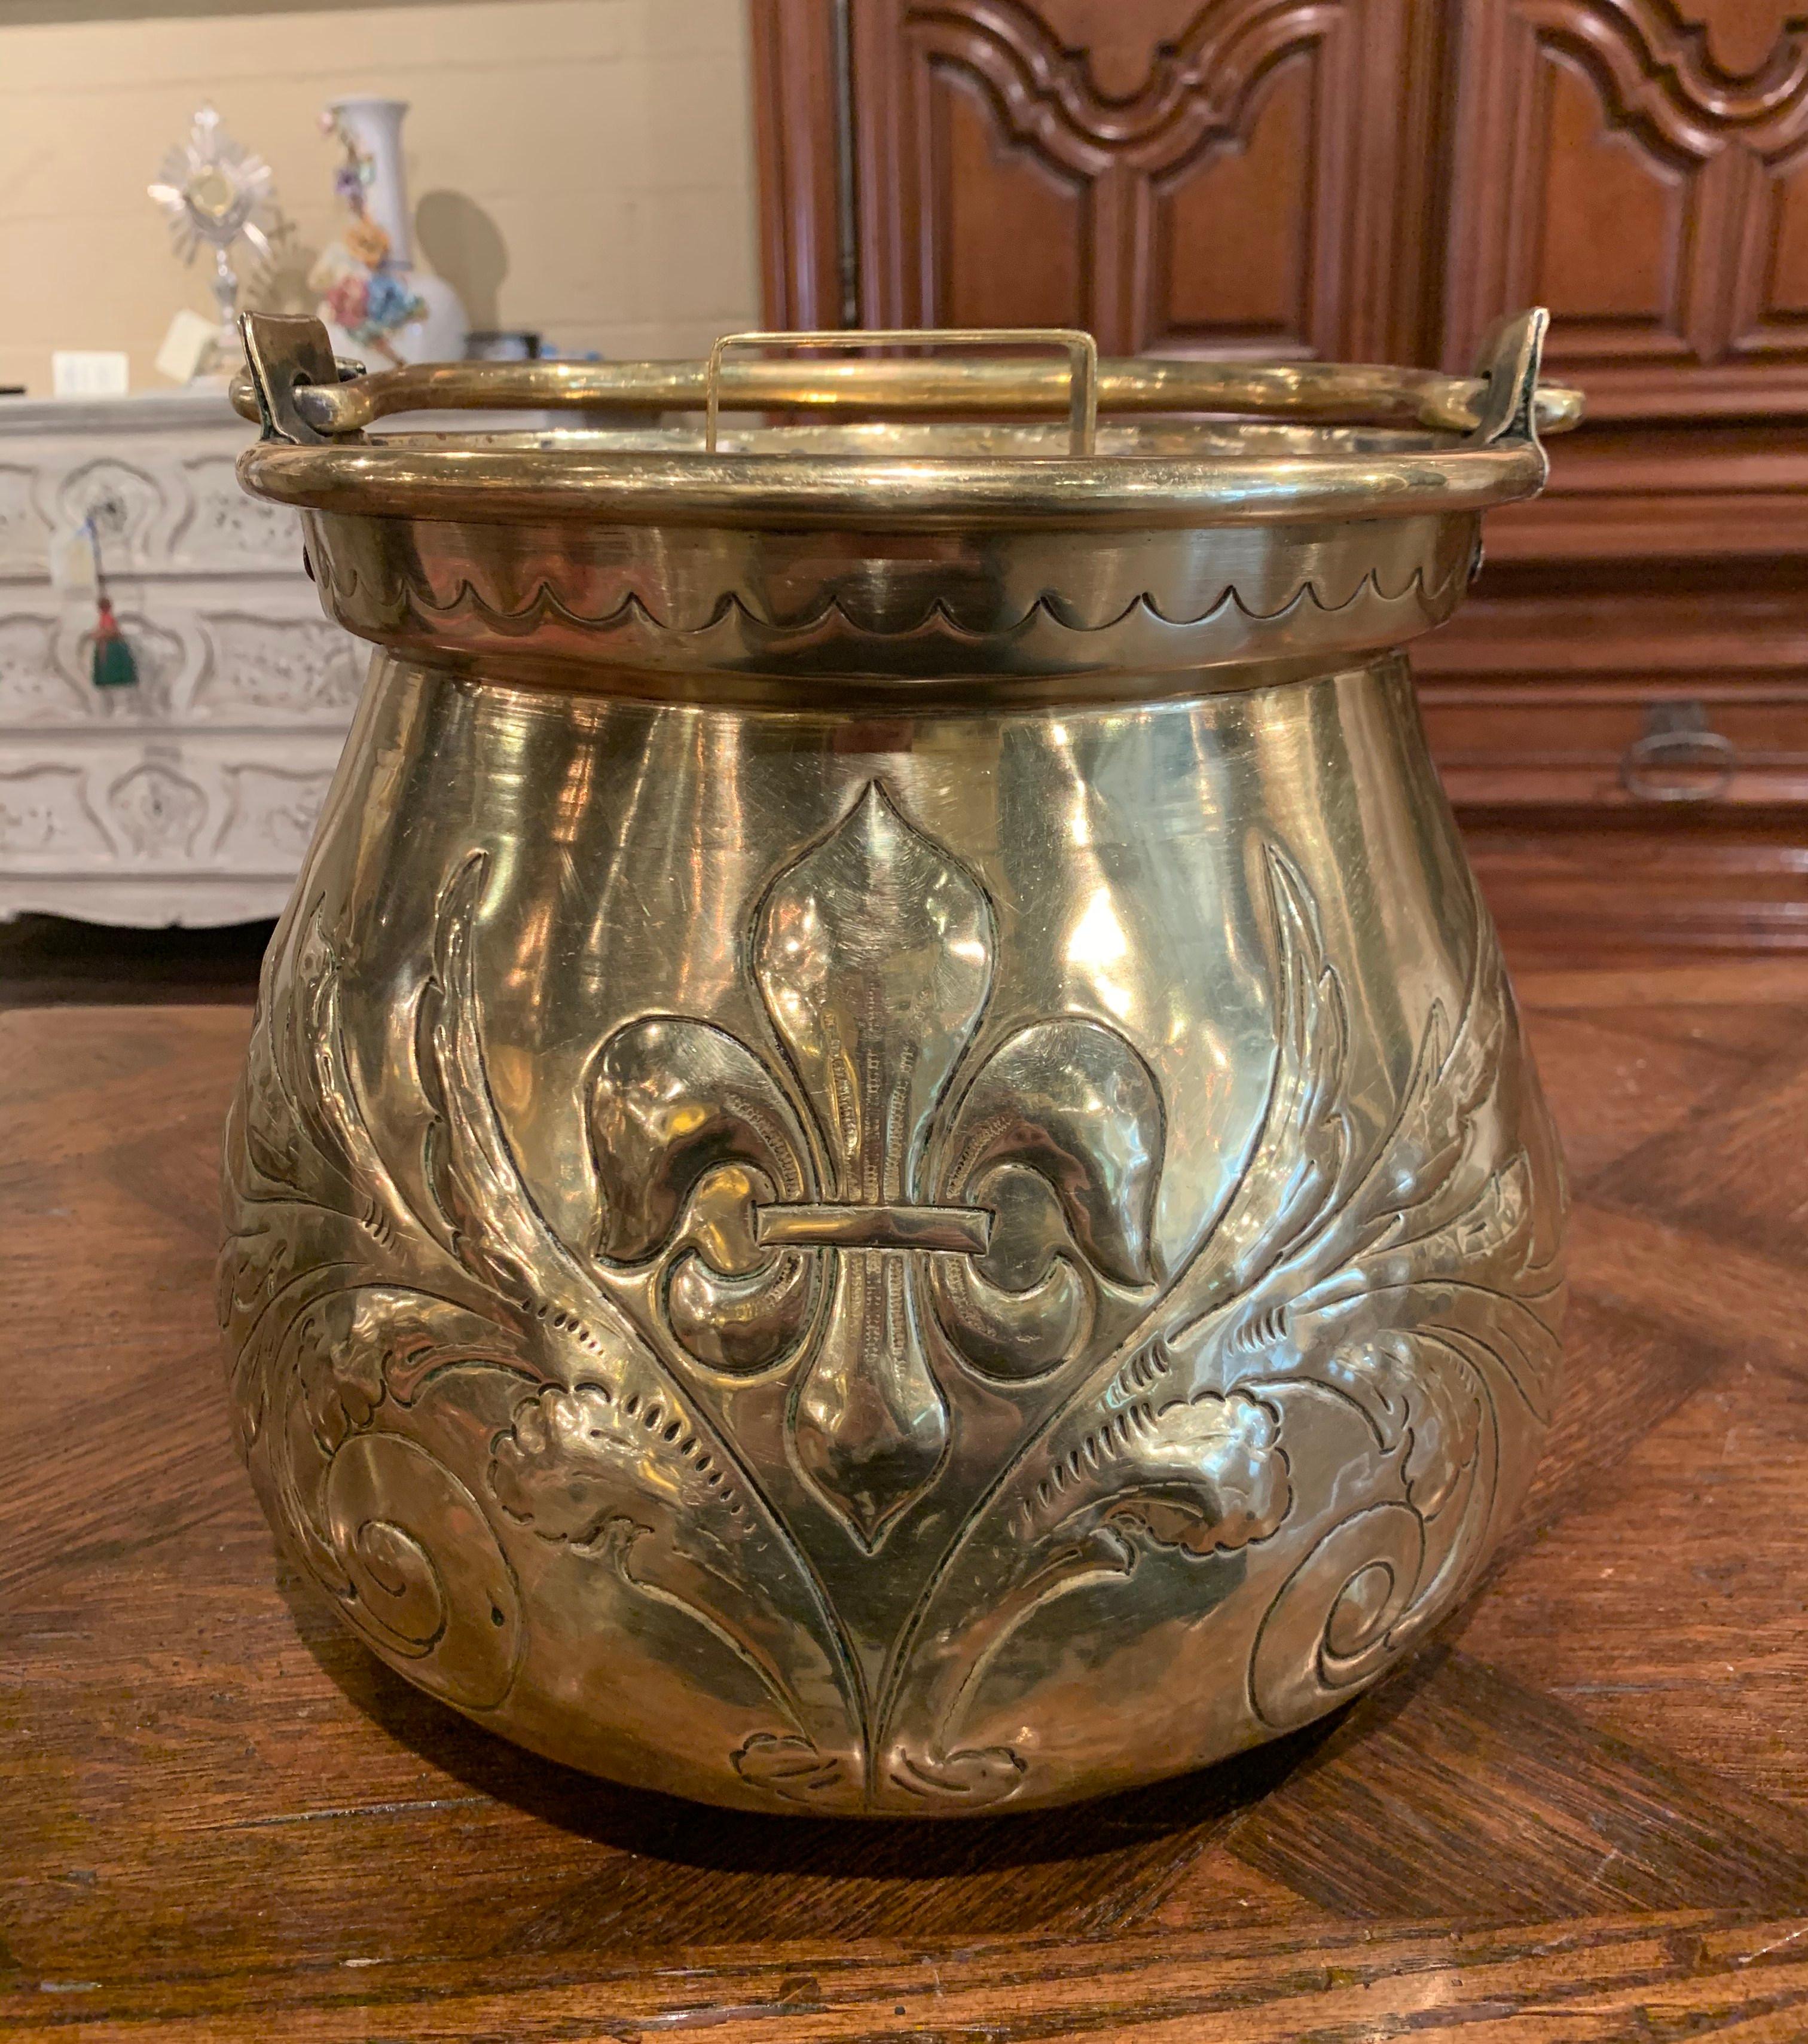 Hand-Crafted Late 17th Century French Louis XIV Brass Cauldron with Fleur de Lys and Crest